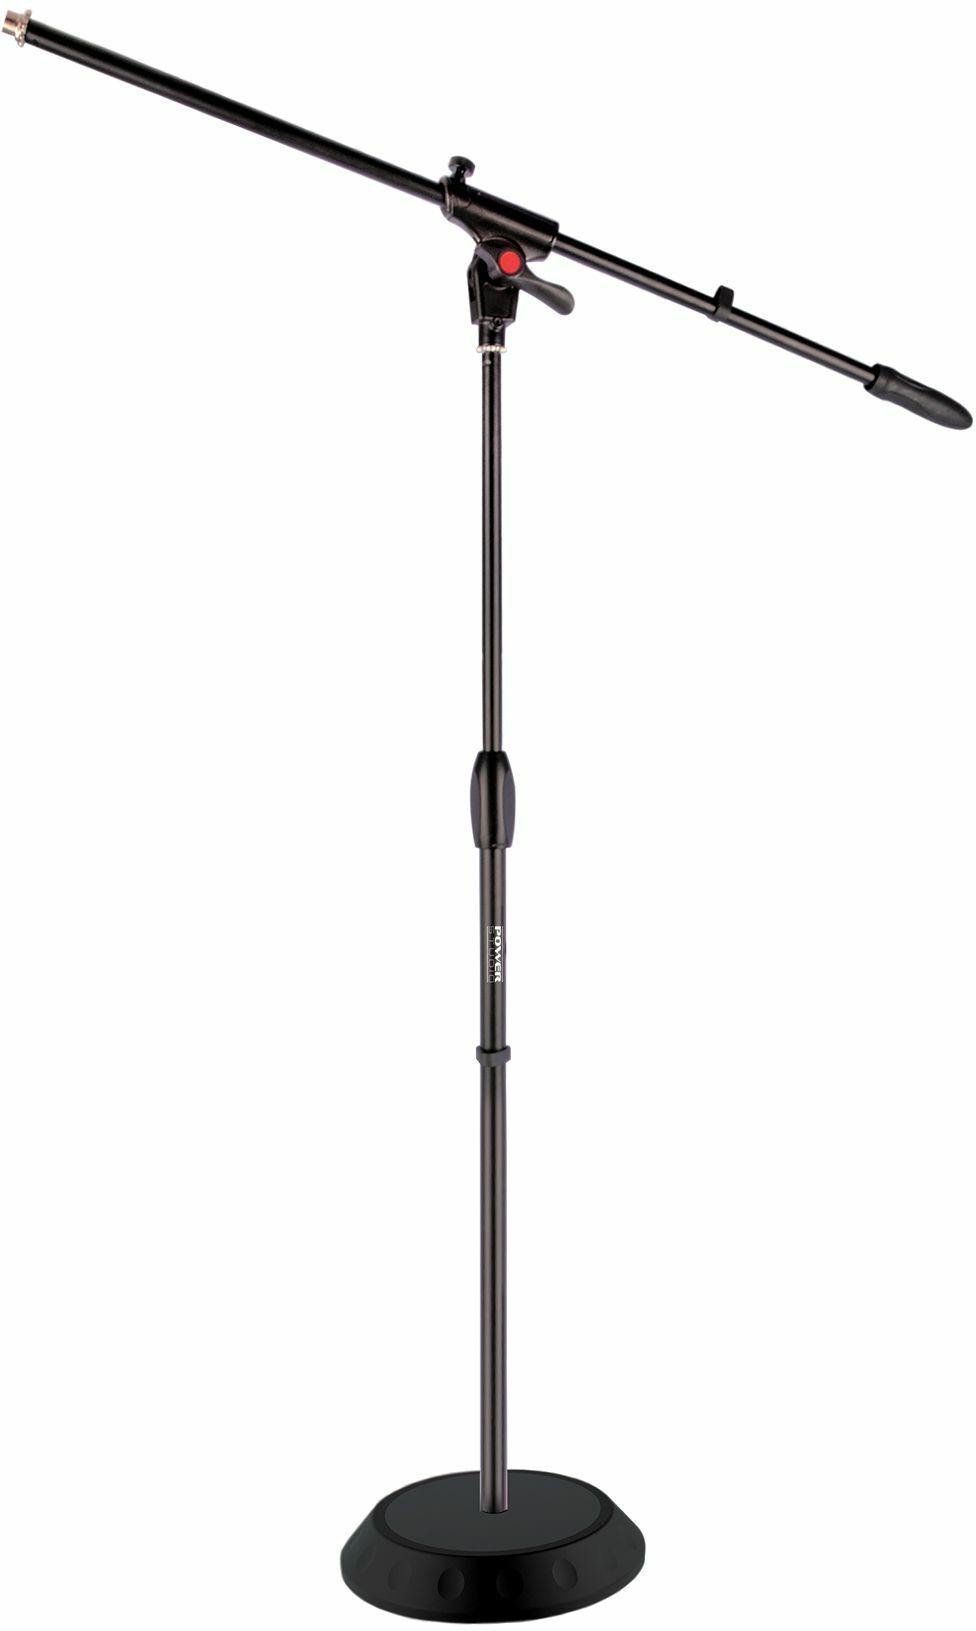 Power Studio Psms 120 - Microphone stand - Main picture